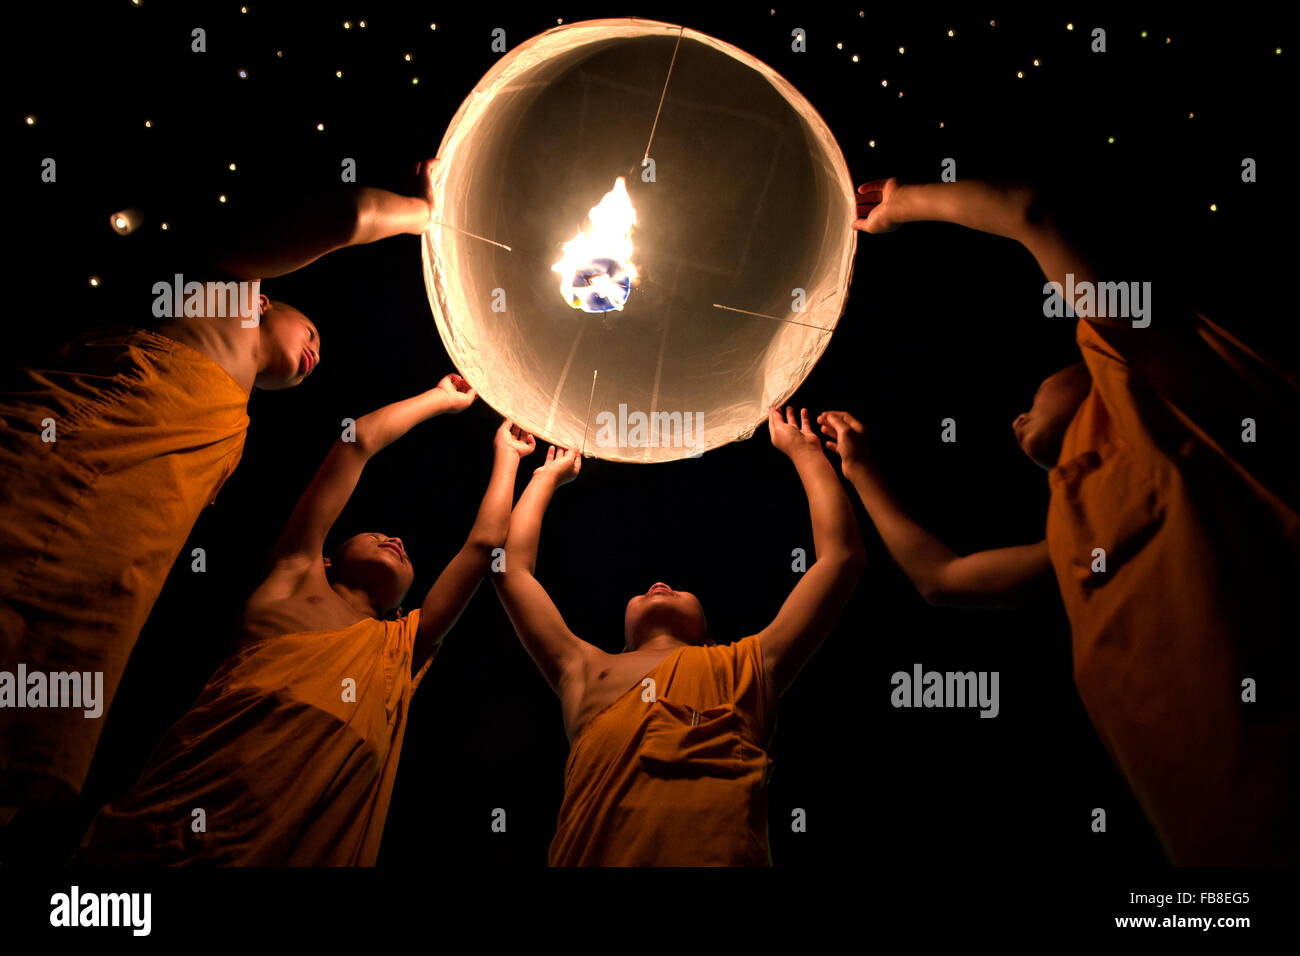 Monks holding a paper lantern at night during Loy Krathong festival in Chiang Mai, Thailand Stock Photo